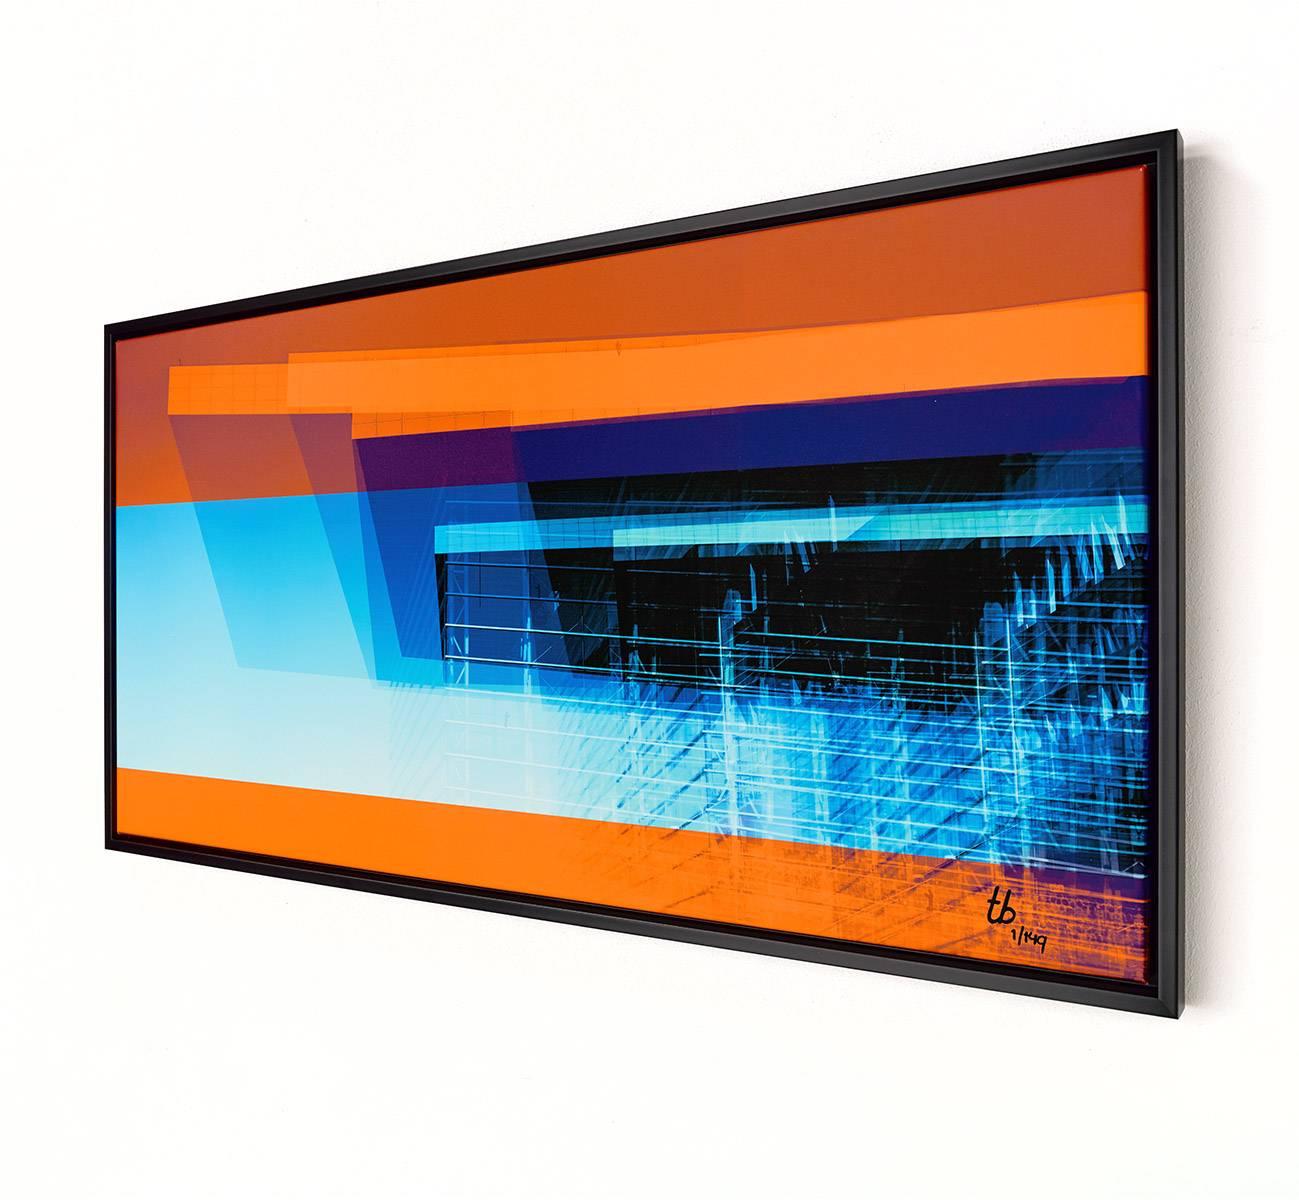 Conduit III - Framed Fine Art Limited Edition of 149 - Contemporary Photograph by Thomas Bijen